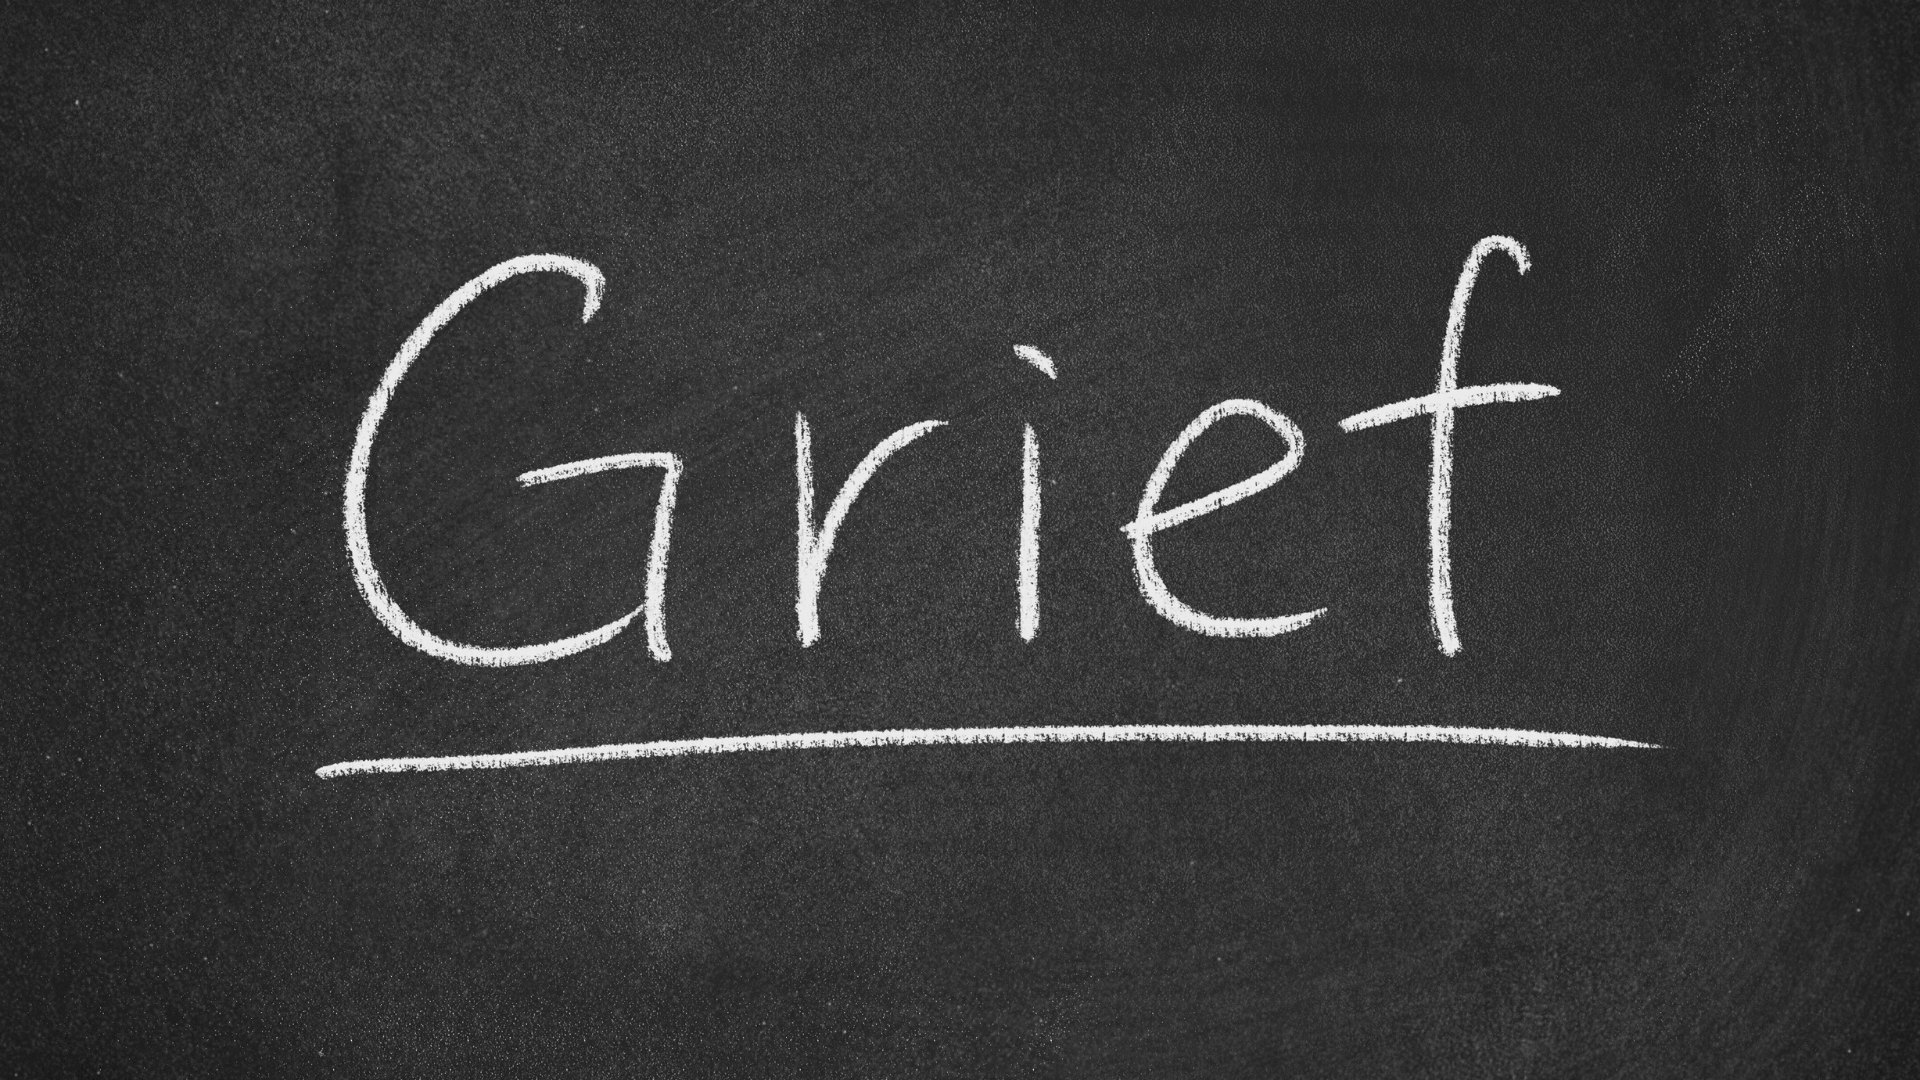 Grief text on chalkboard